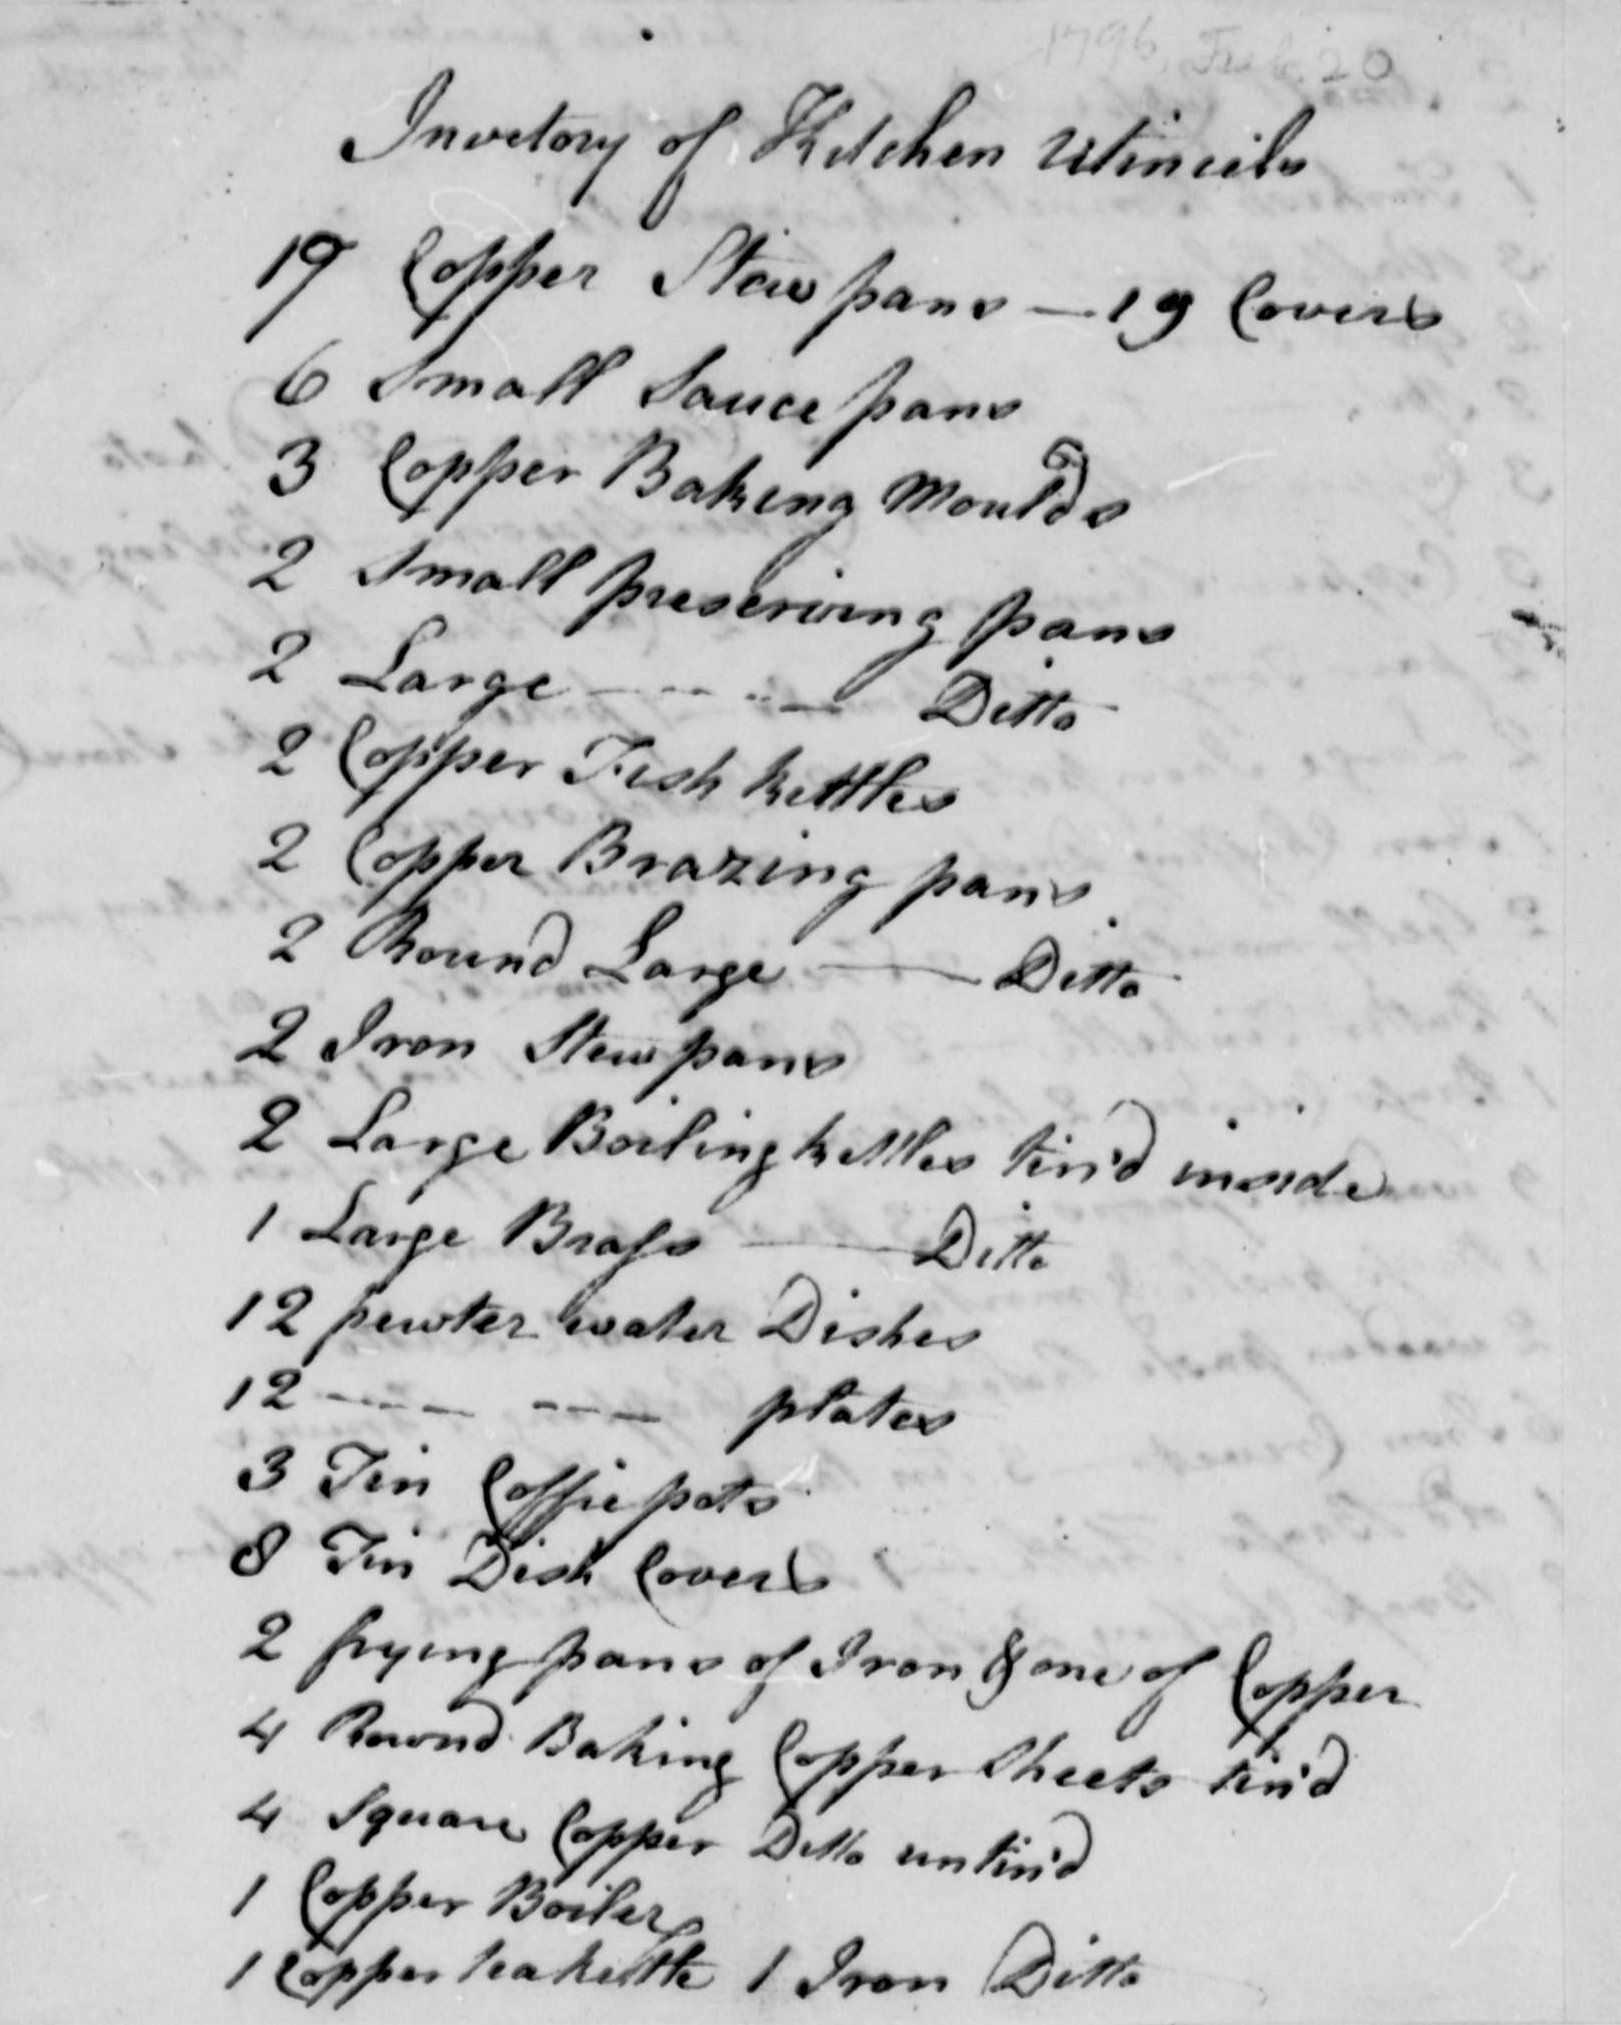 Above, a handwritten kitchen list from Monticello, Thomas Jefferson’s residence in Virginia, where James Hemings was the chef.